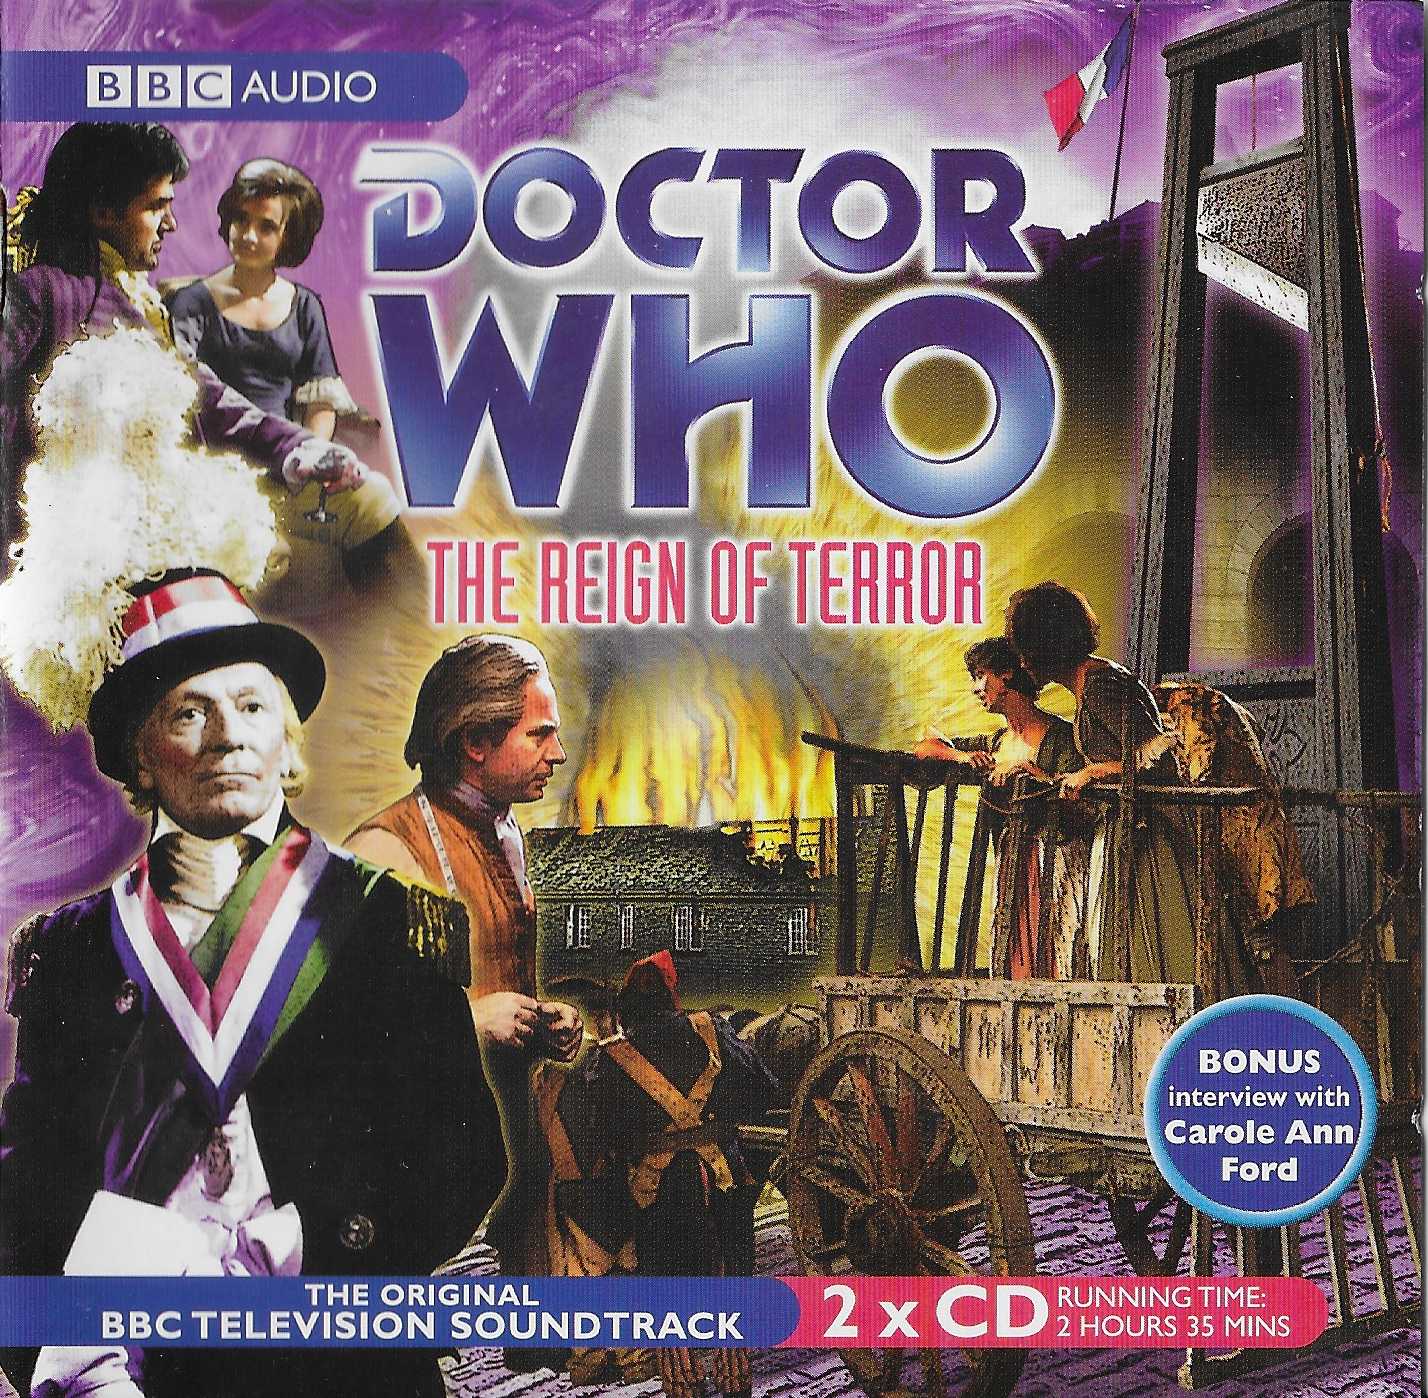 Picture of ISBN 0-563-52342-5 Doctor Who - The reign or terror by artist Dennis Spooner from the BBC cds - Records and Tapes library